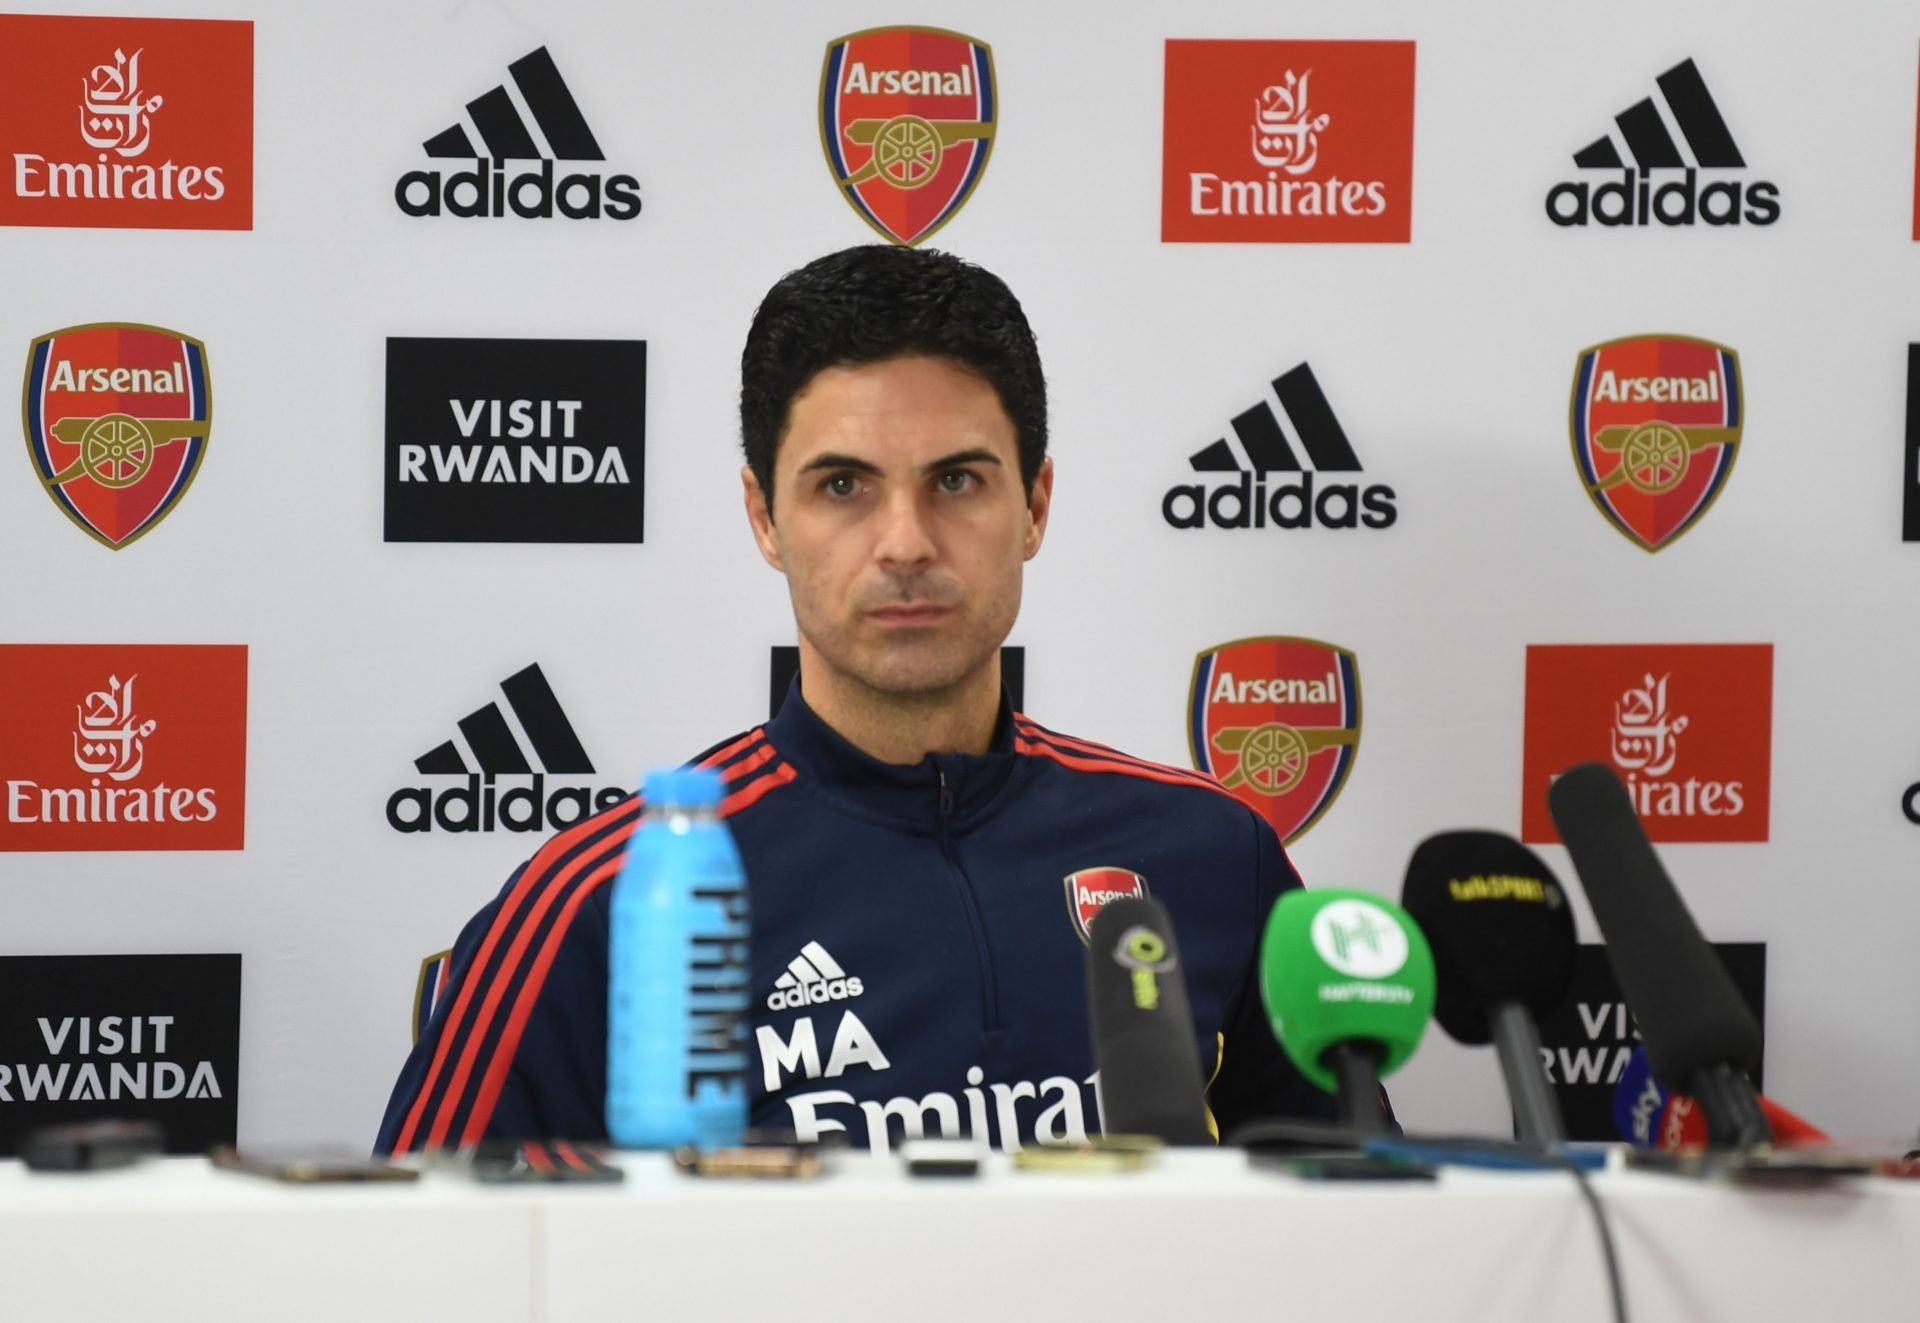 ‘I go in once a week’: Seaman shares what he’s noticed about Arteta’s sessions at Colney